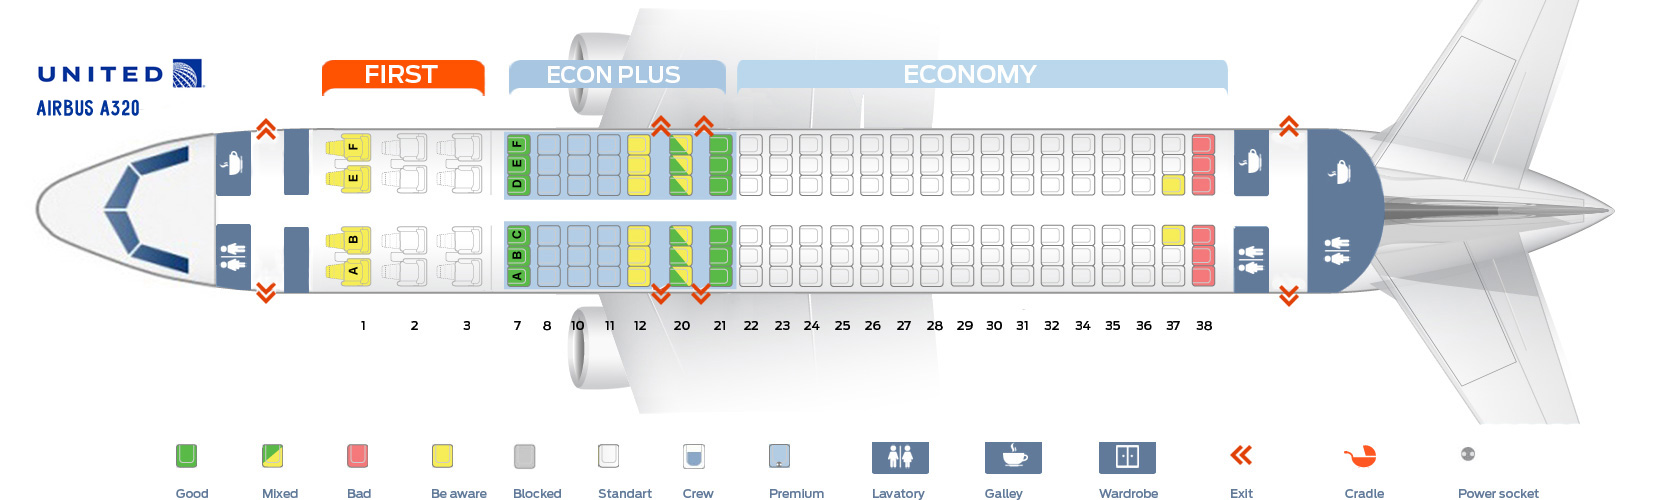 Seat map Airbus A320-200 United Airlines. Best seats in plane